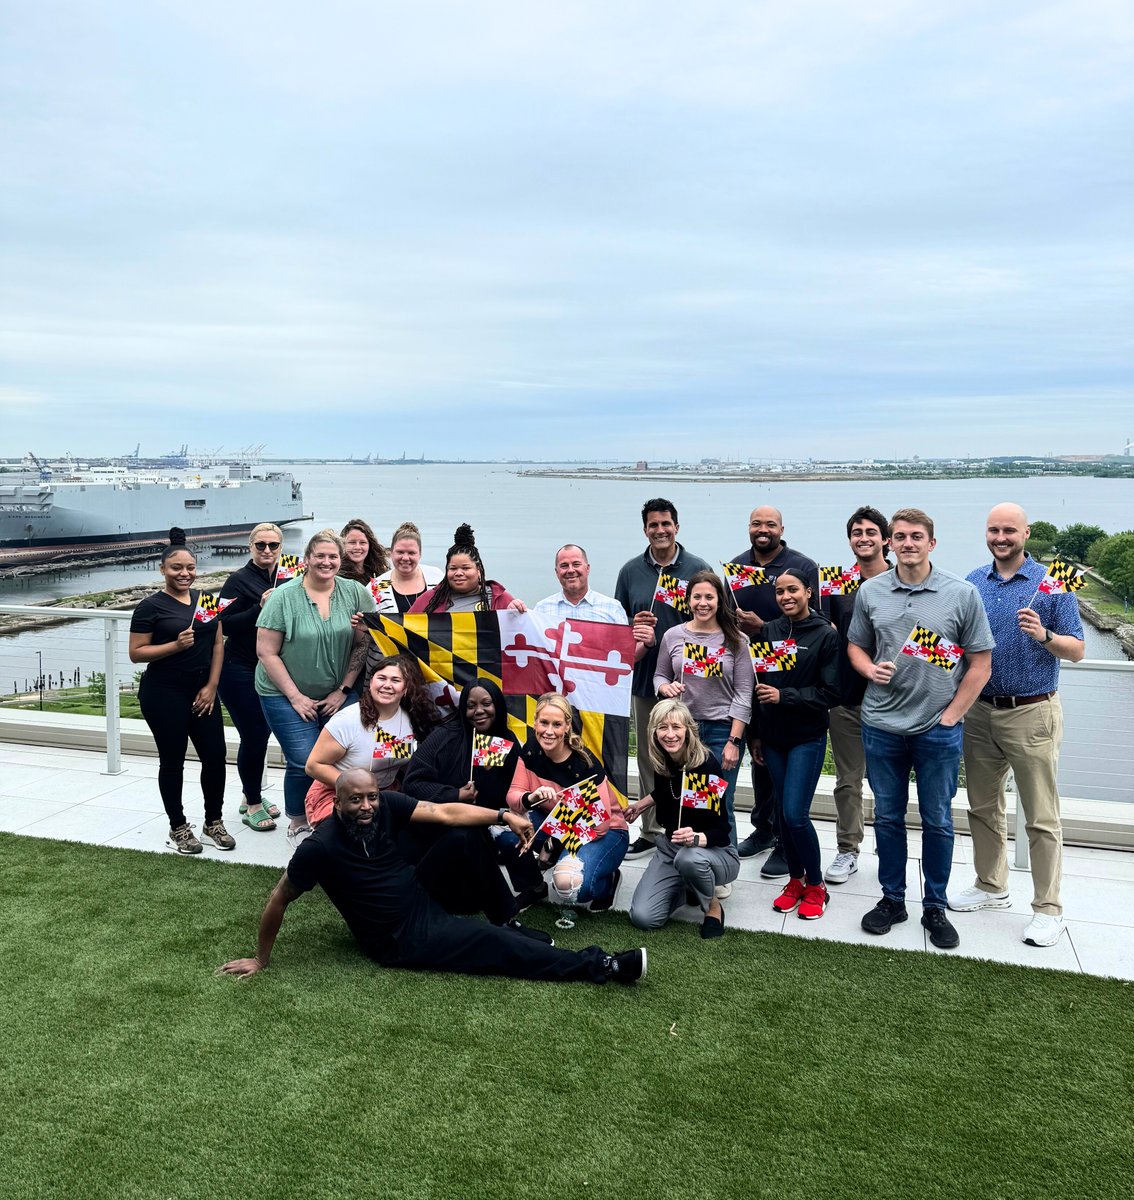 We are Maryland Tough and Baltimore Strong. It’s been nearly two months since the Key Bridge tragedy and as we look at the aftermath each day from our new HQ, we wanted to do more to help the recovery efforts and Baltimoreans impacted. We’re proud to launch our Maryland Tough